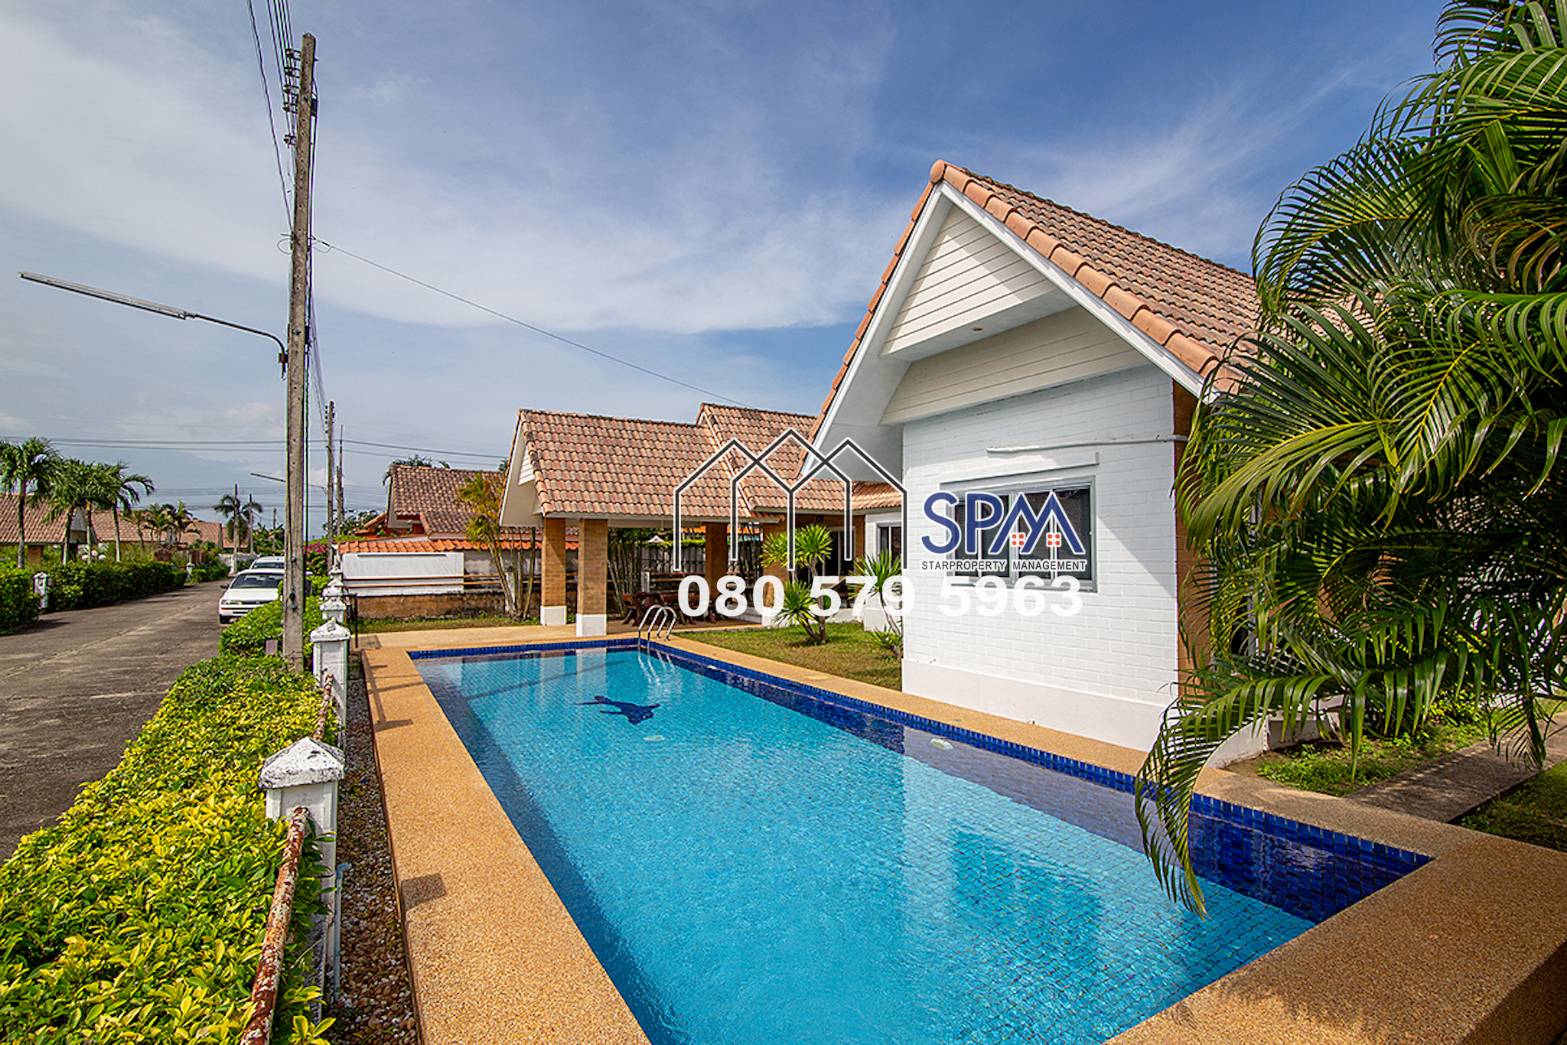 Pool Villa for rent at Dusita 1 Hua Hin Soi 112, price 25,000 Baht per month, 1 year contract only